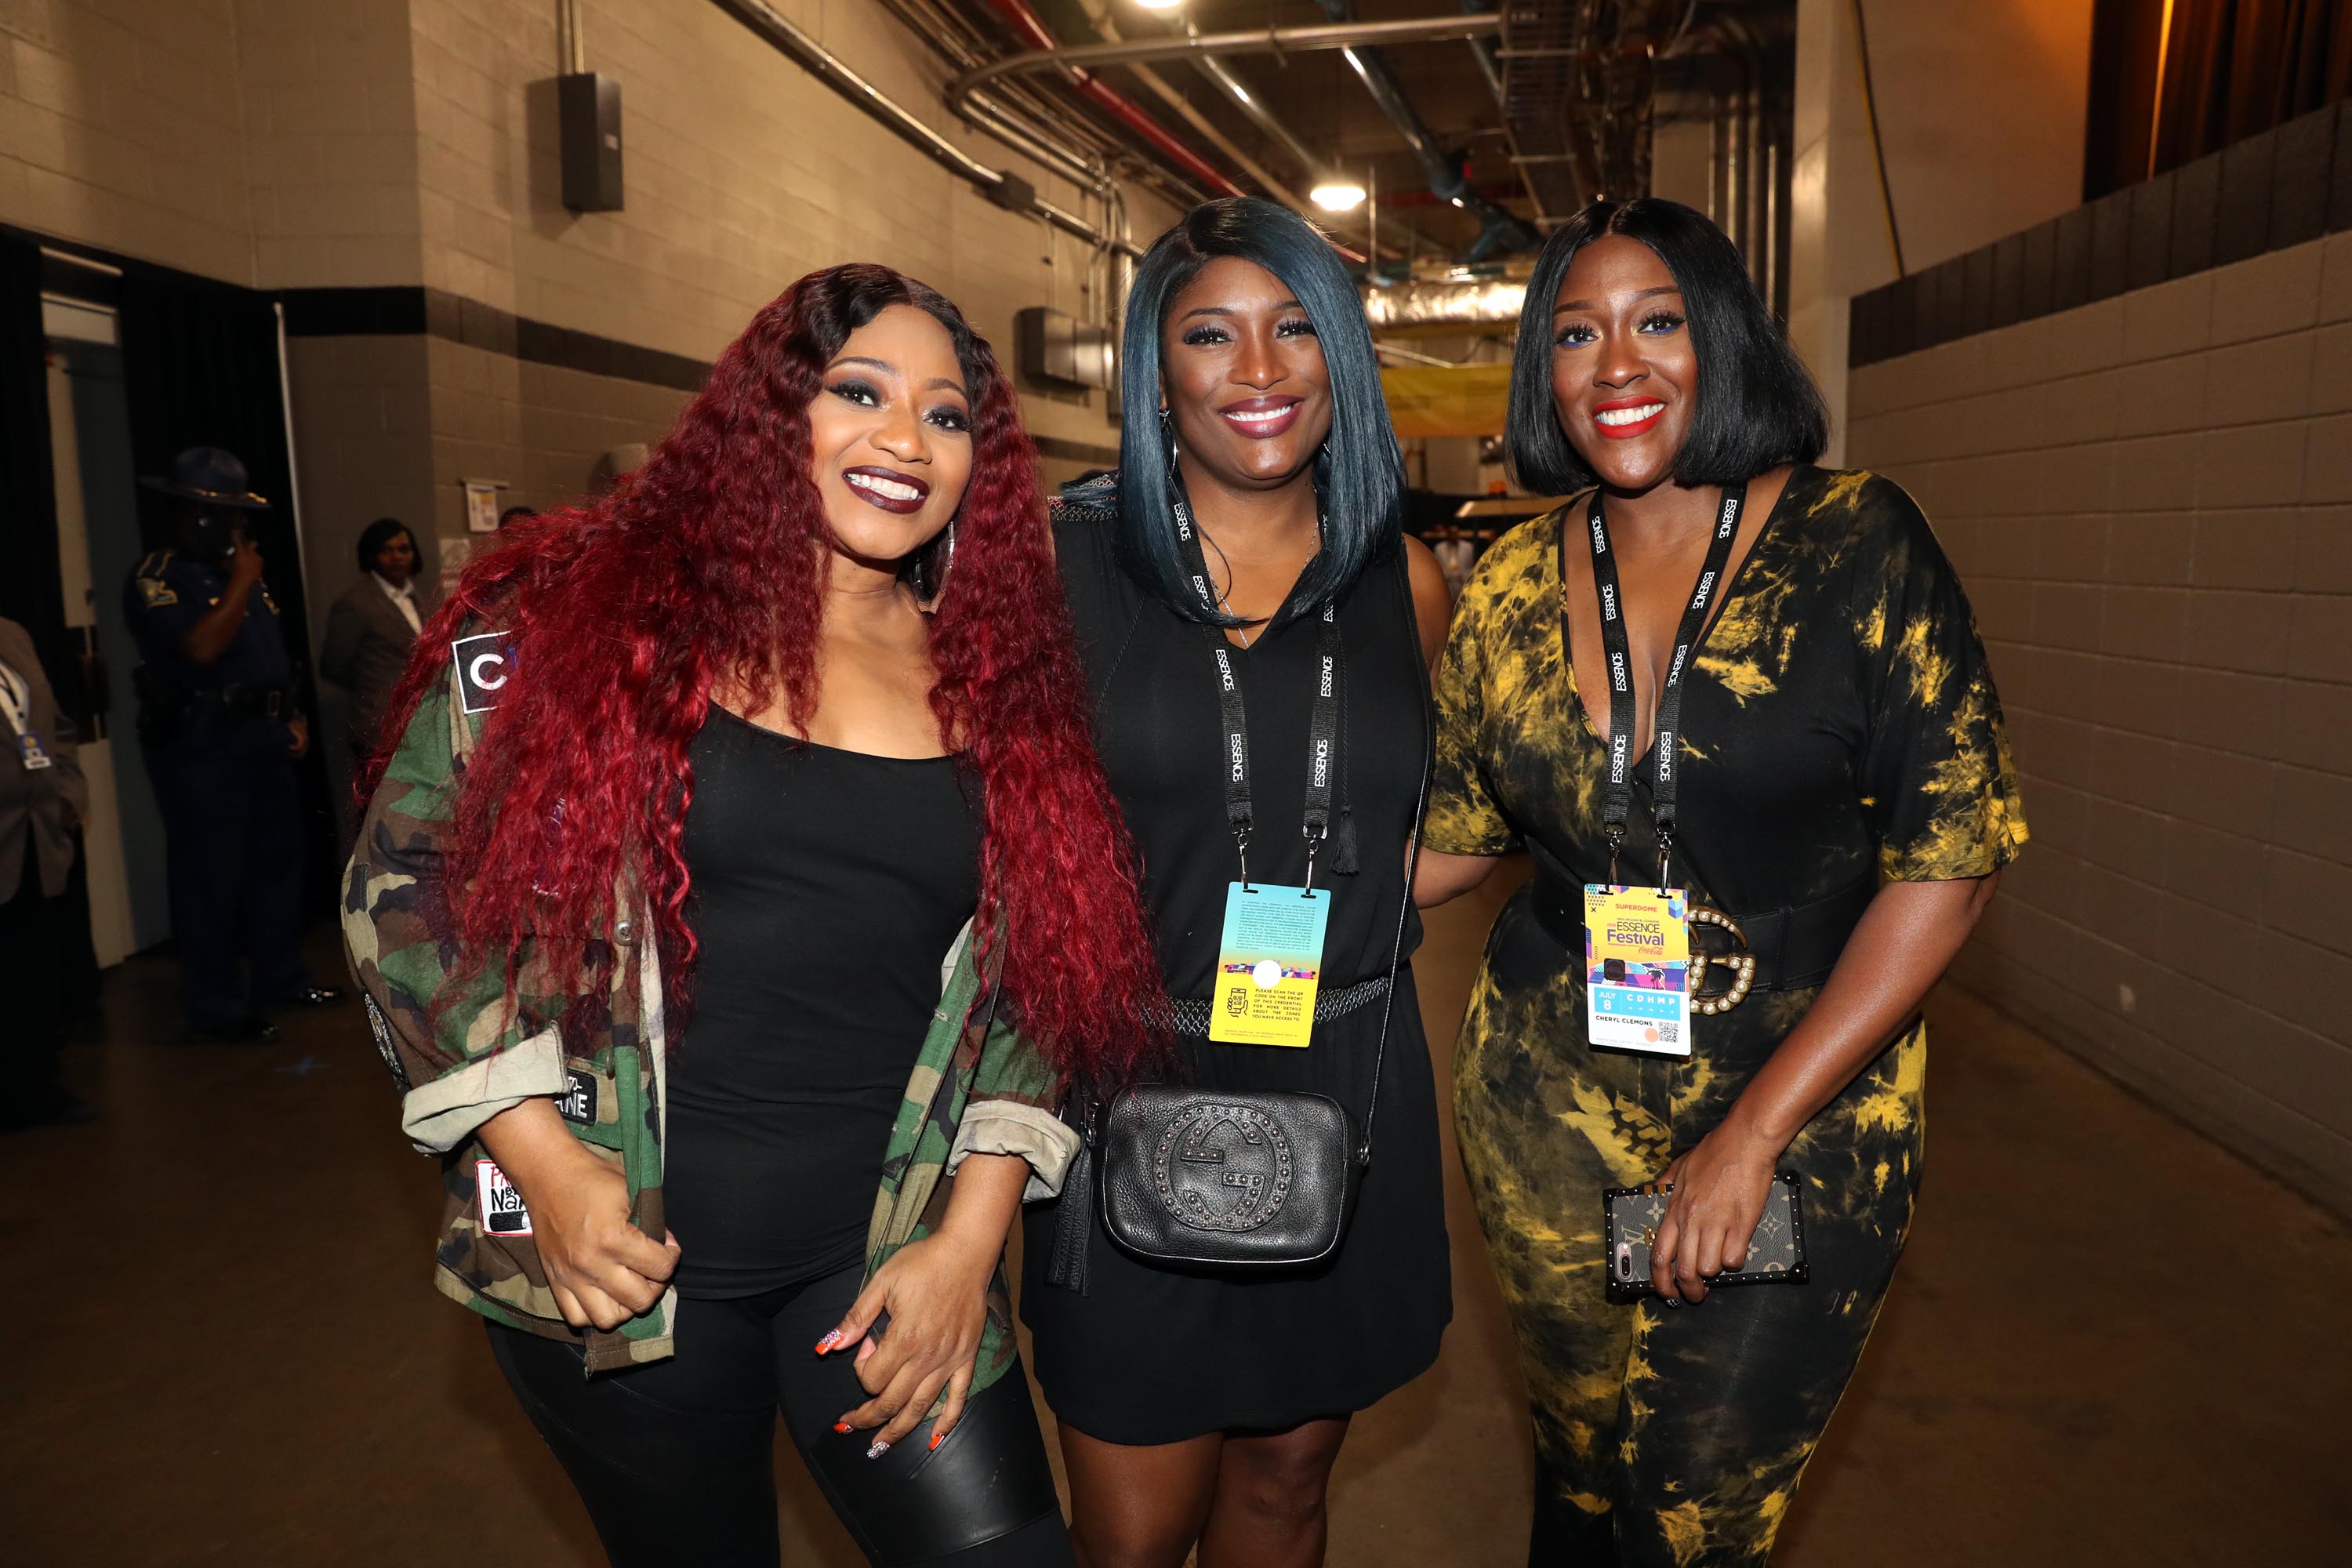 Celebrity Photos of the Week: ESSENCE Festival 2018 Edition
